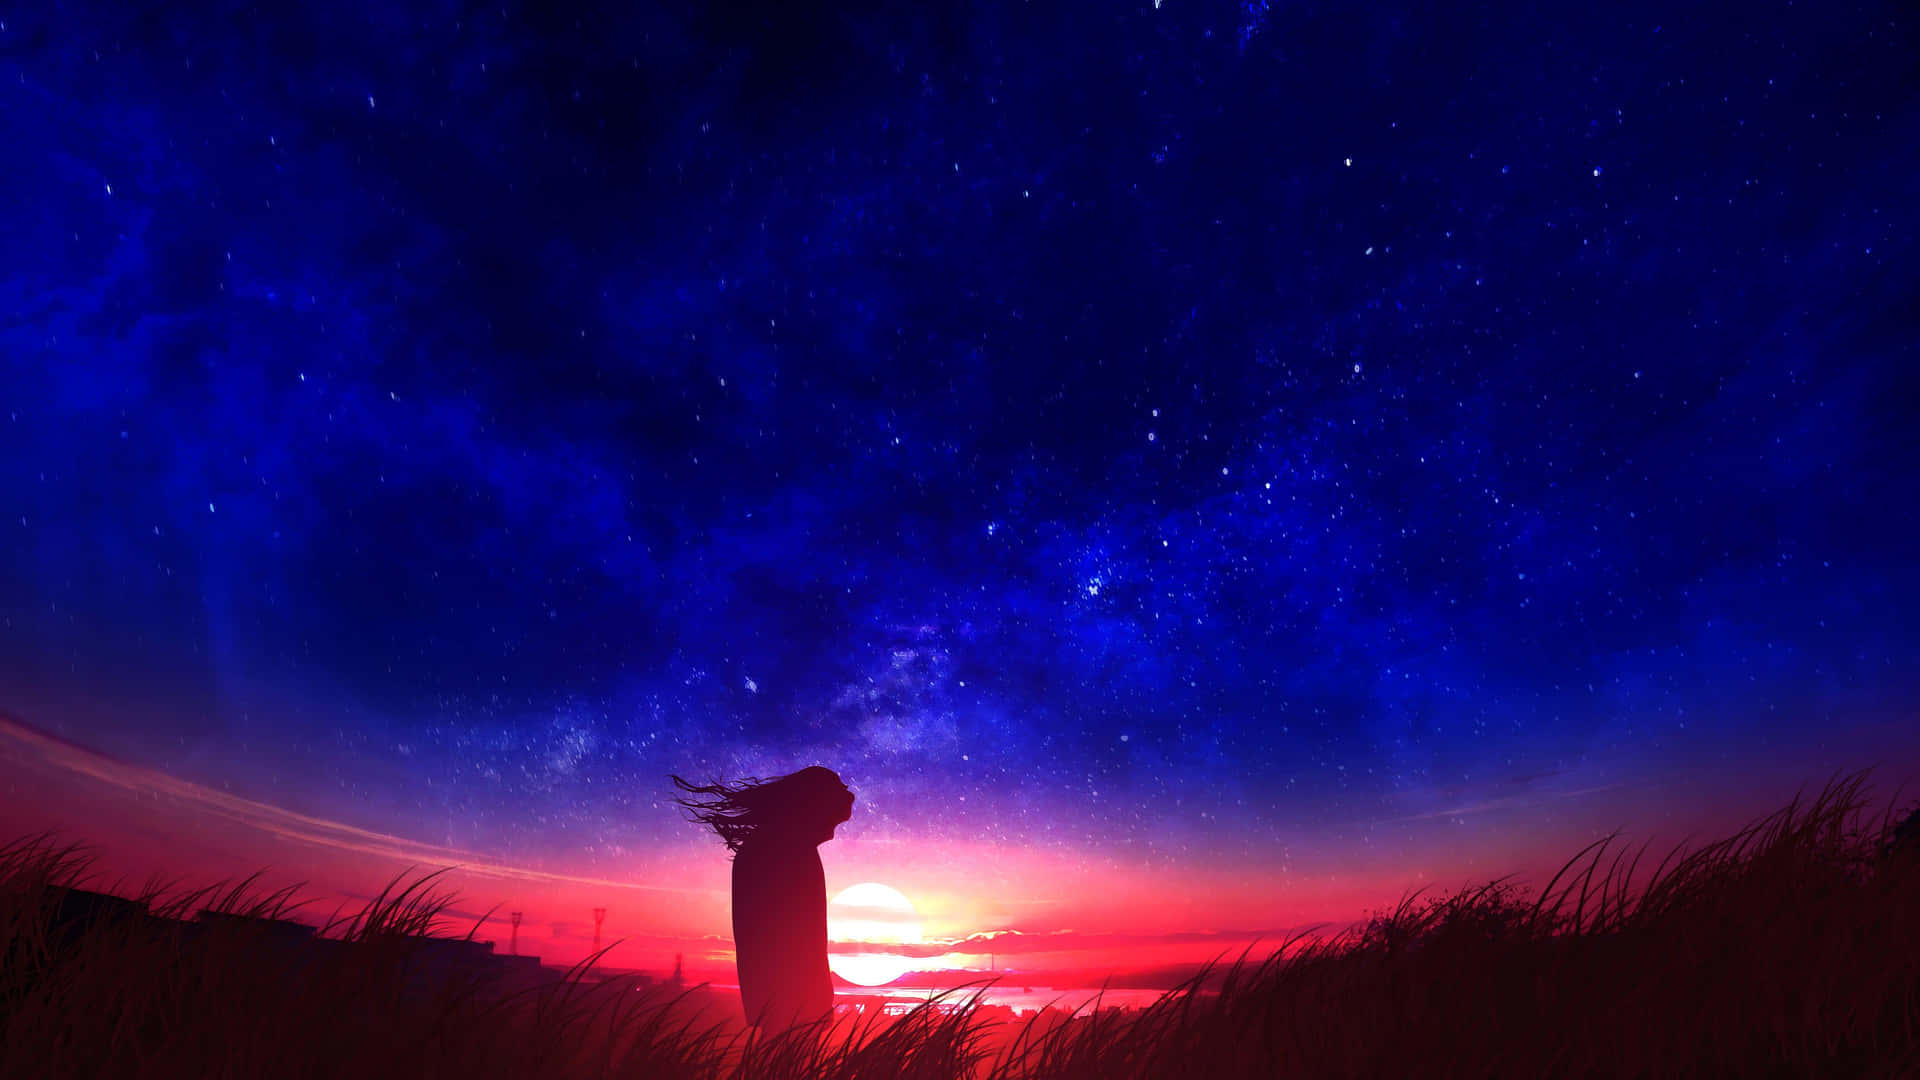 Download Aesthetic Night Sky With Silhouette Wallpaper | Wallpapers.com